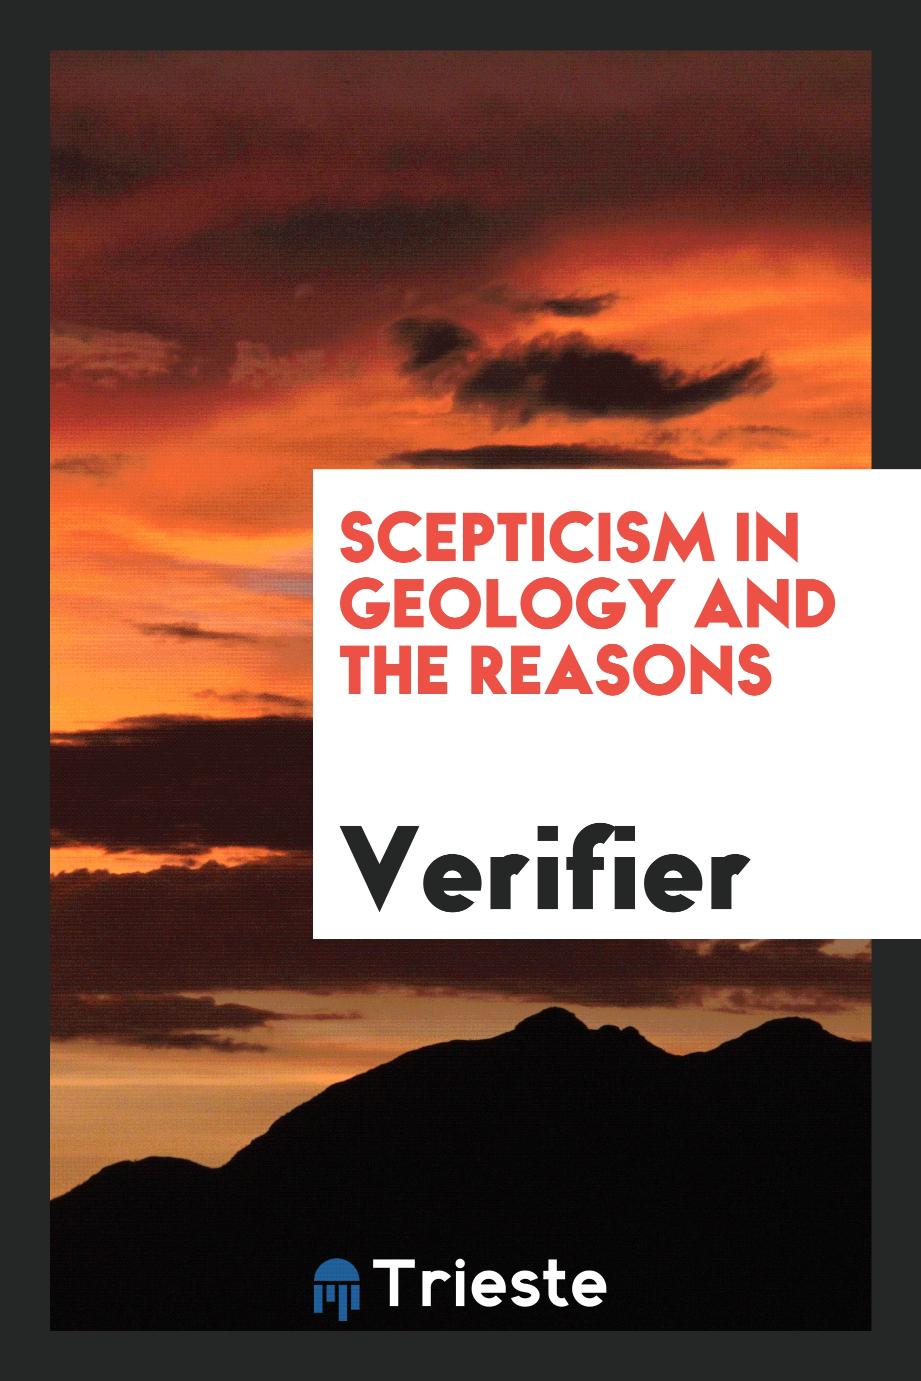 Scepticism in Geology and the Reasons